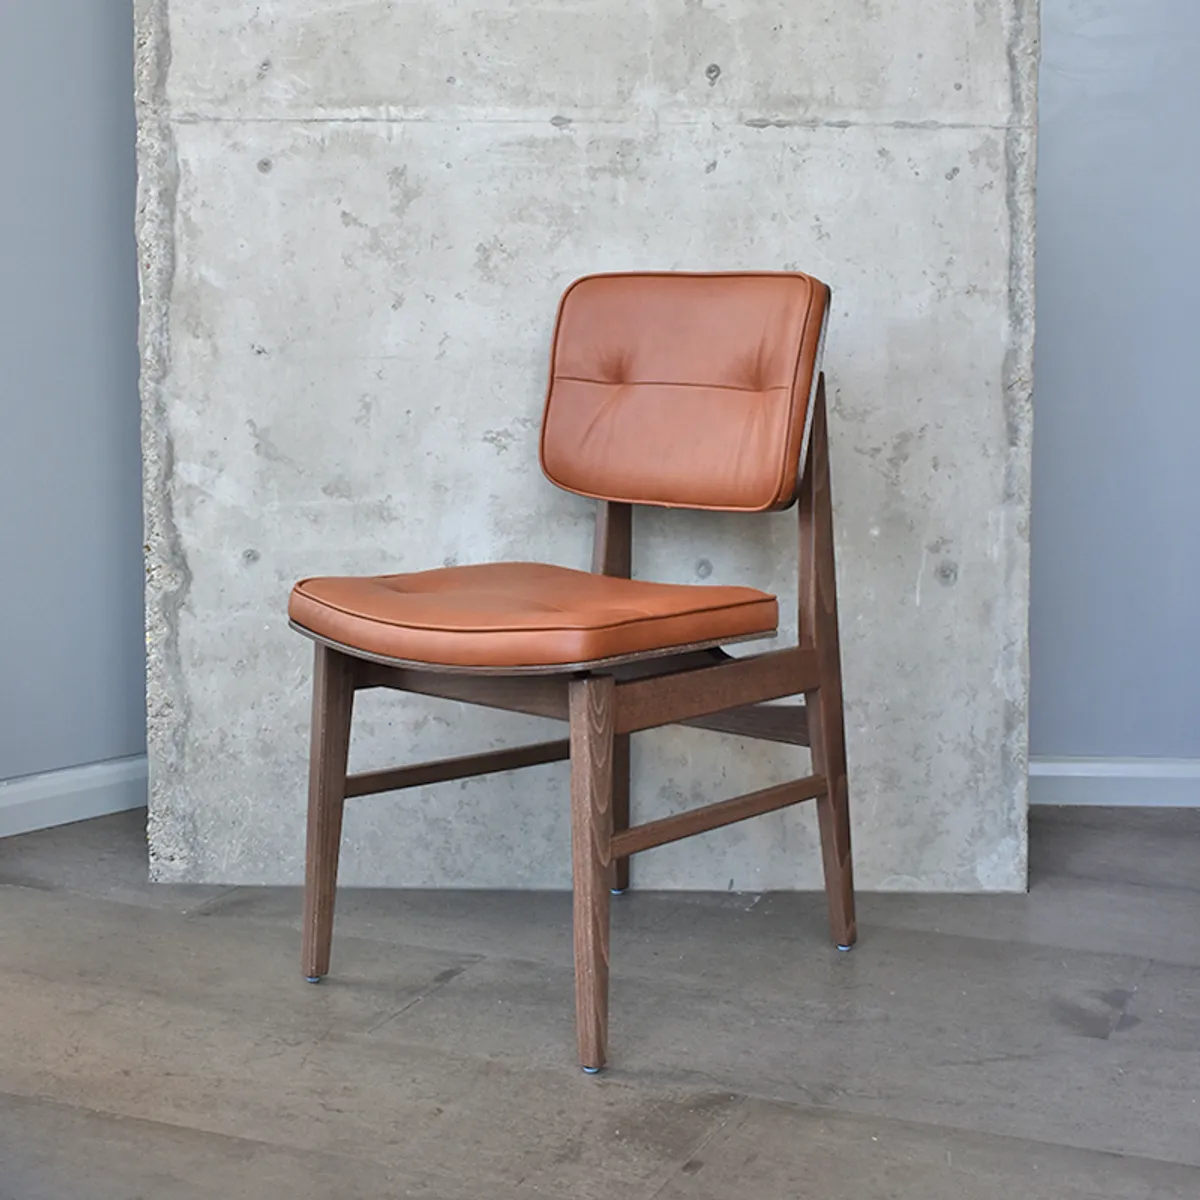 Hardwick Side Chair New Furniture From Milan 2019 By Inside Out Contracts 030